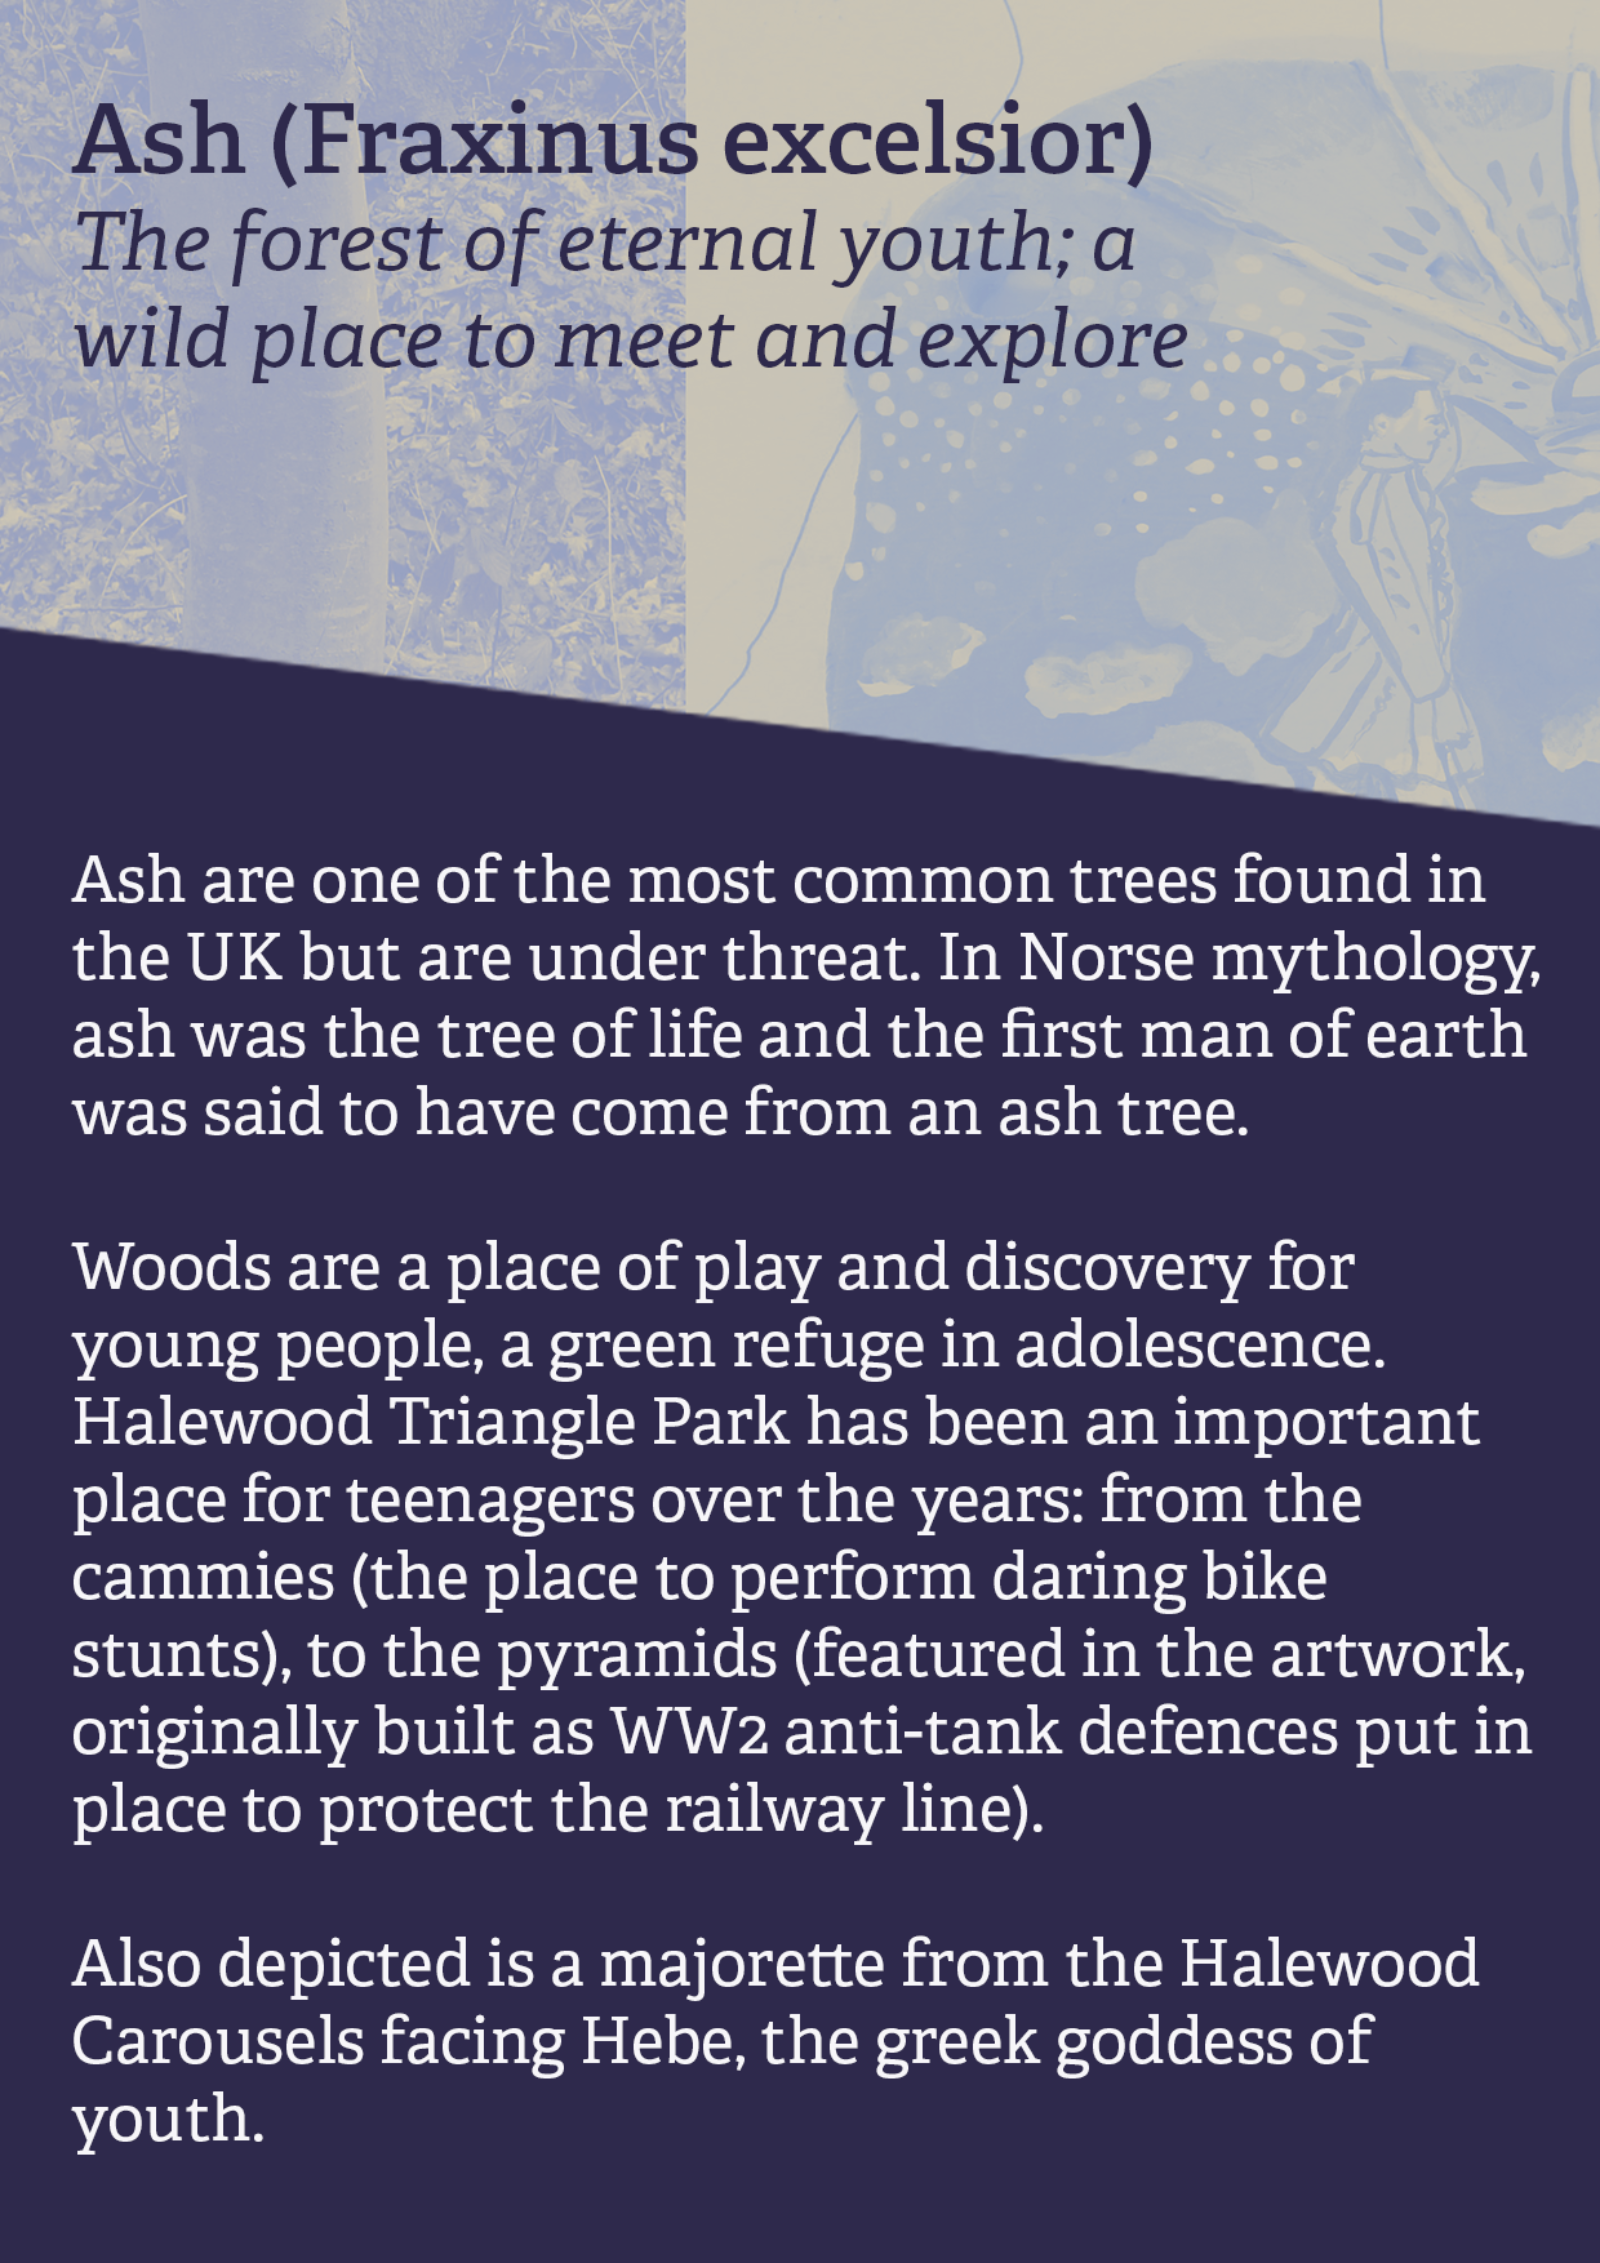 information card for the ash tree artwork